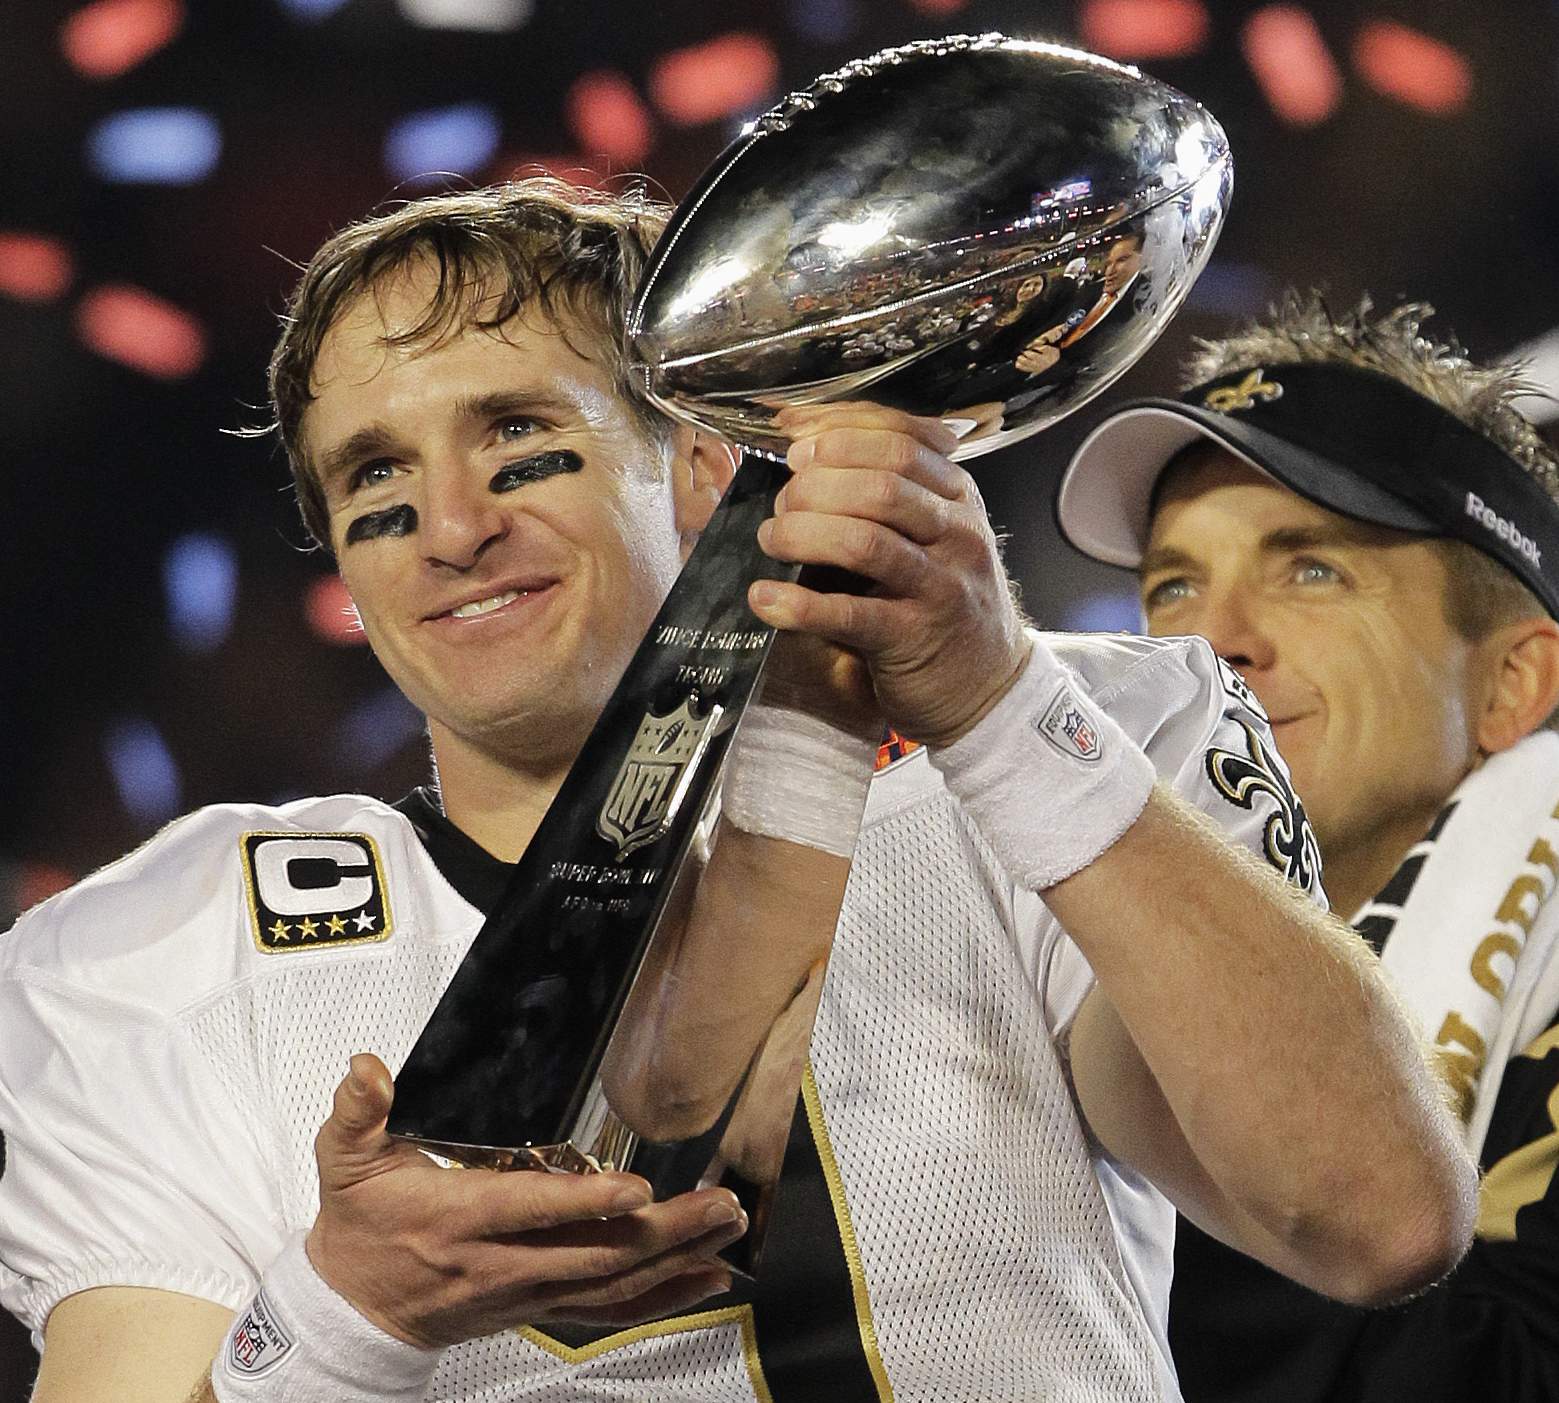 Next play: Brees joins NBC Sports after retiring from NFL